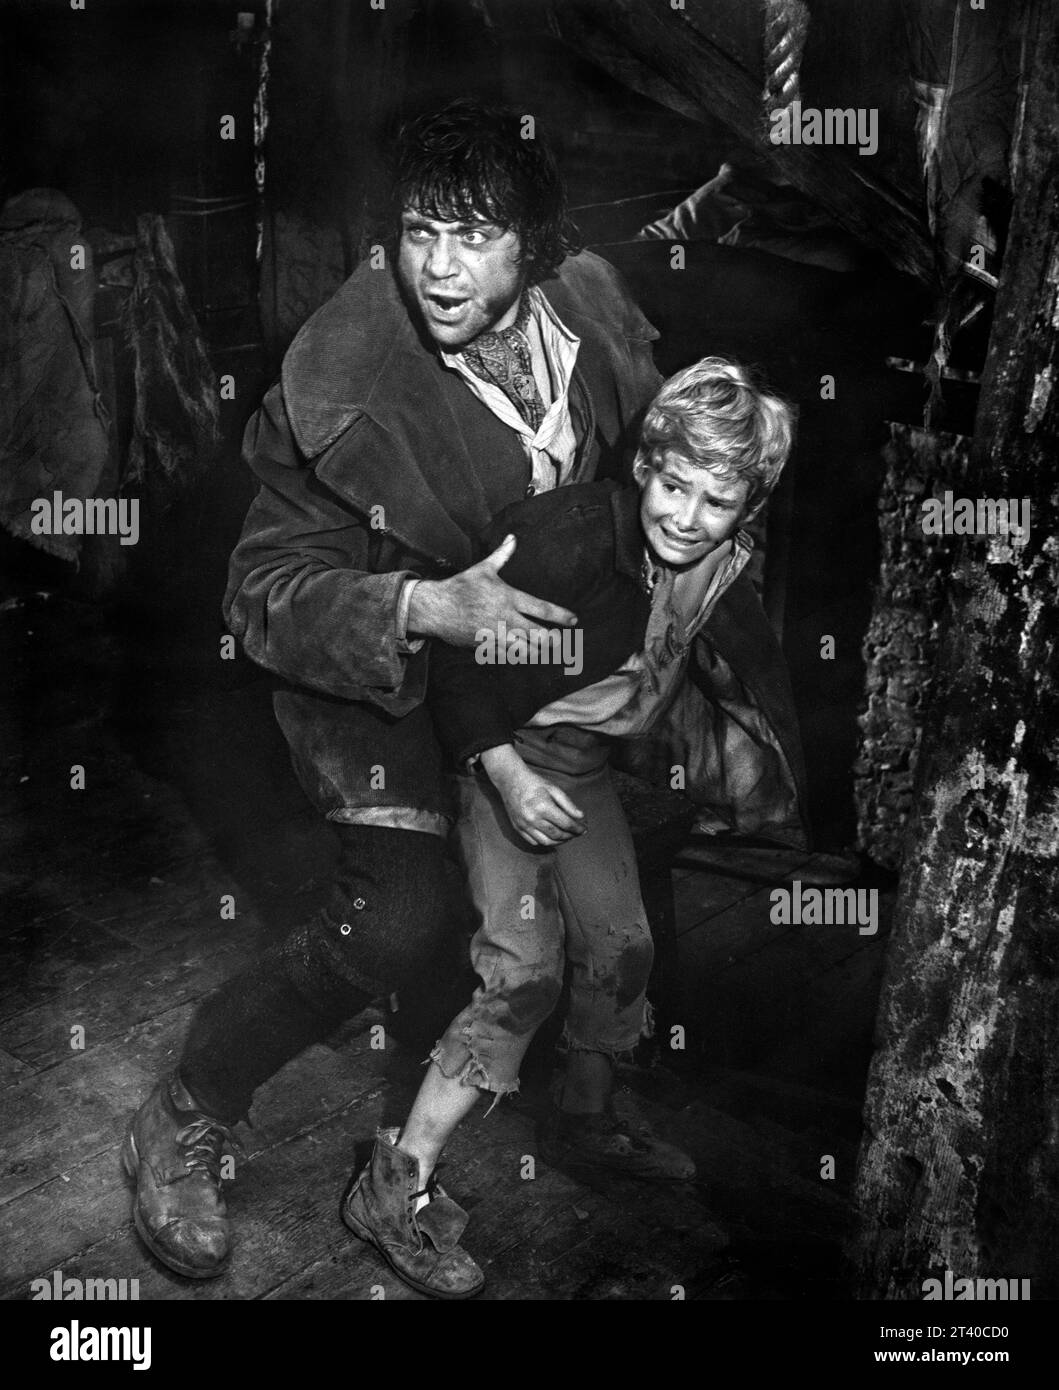 Oliver Reed, Mark Lester, on-set of the British musical film, 'Oliver!', Columbia Pictures, 1968 Stock Photo